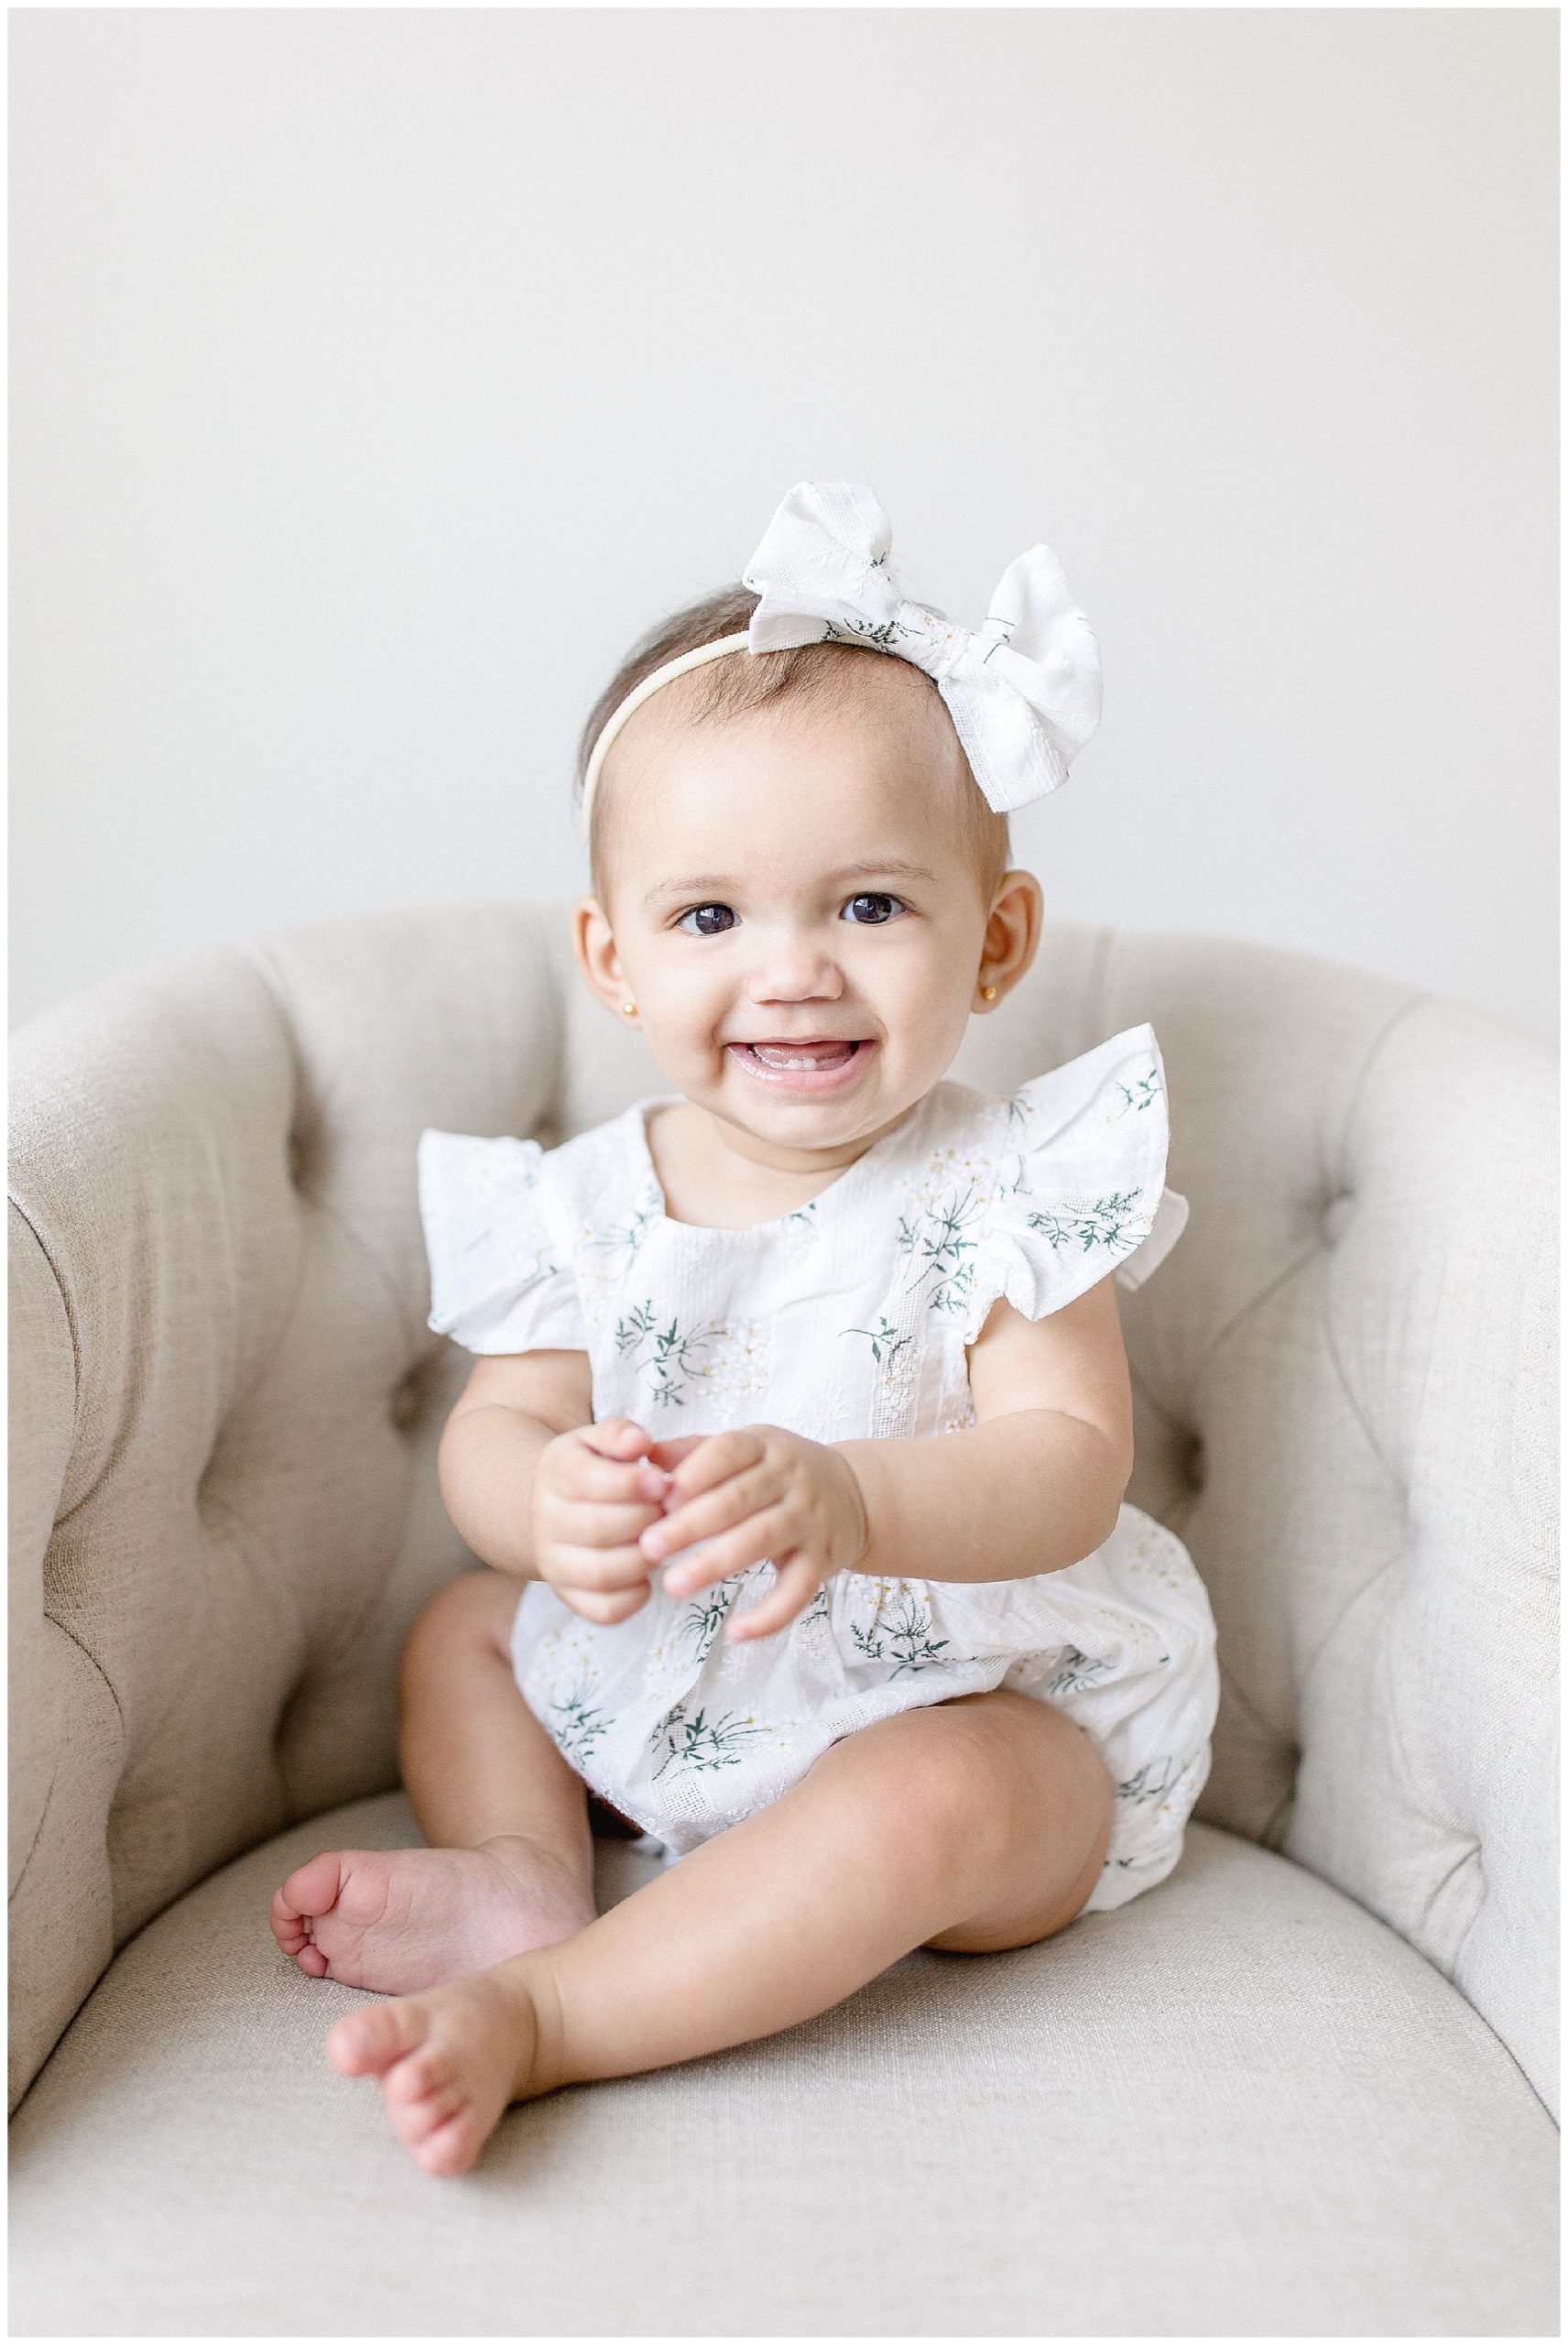 Baby girl in romper & bow. Photos by Ivanna Vidal Photography.